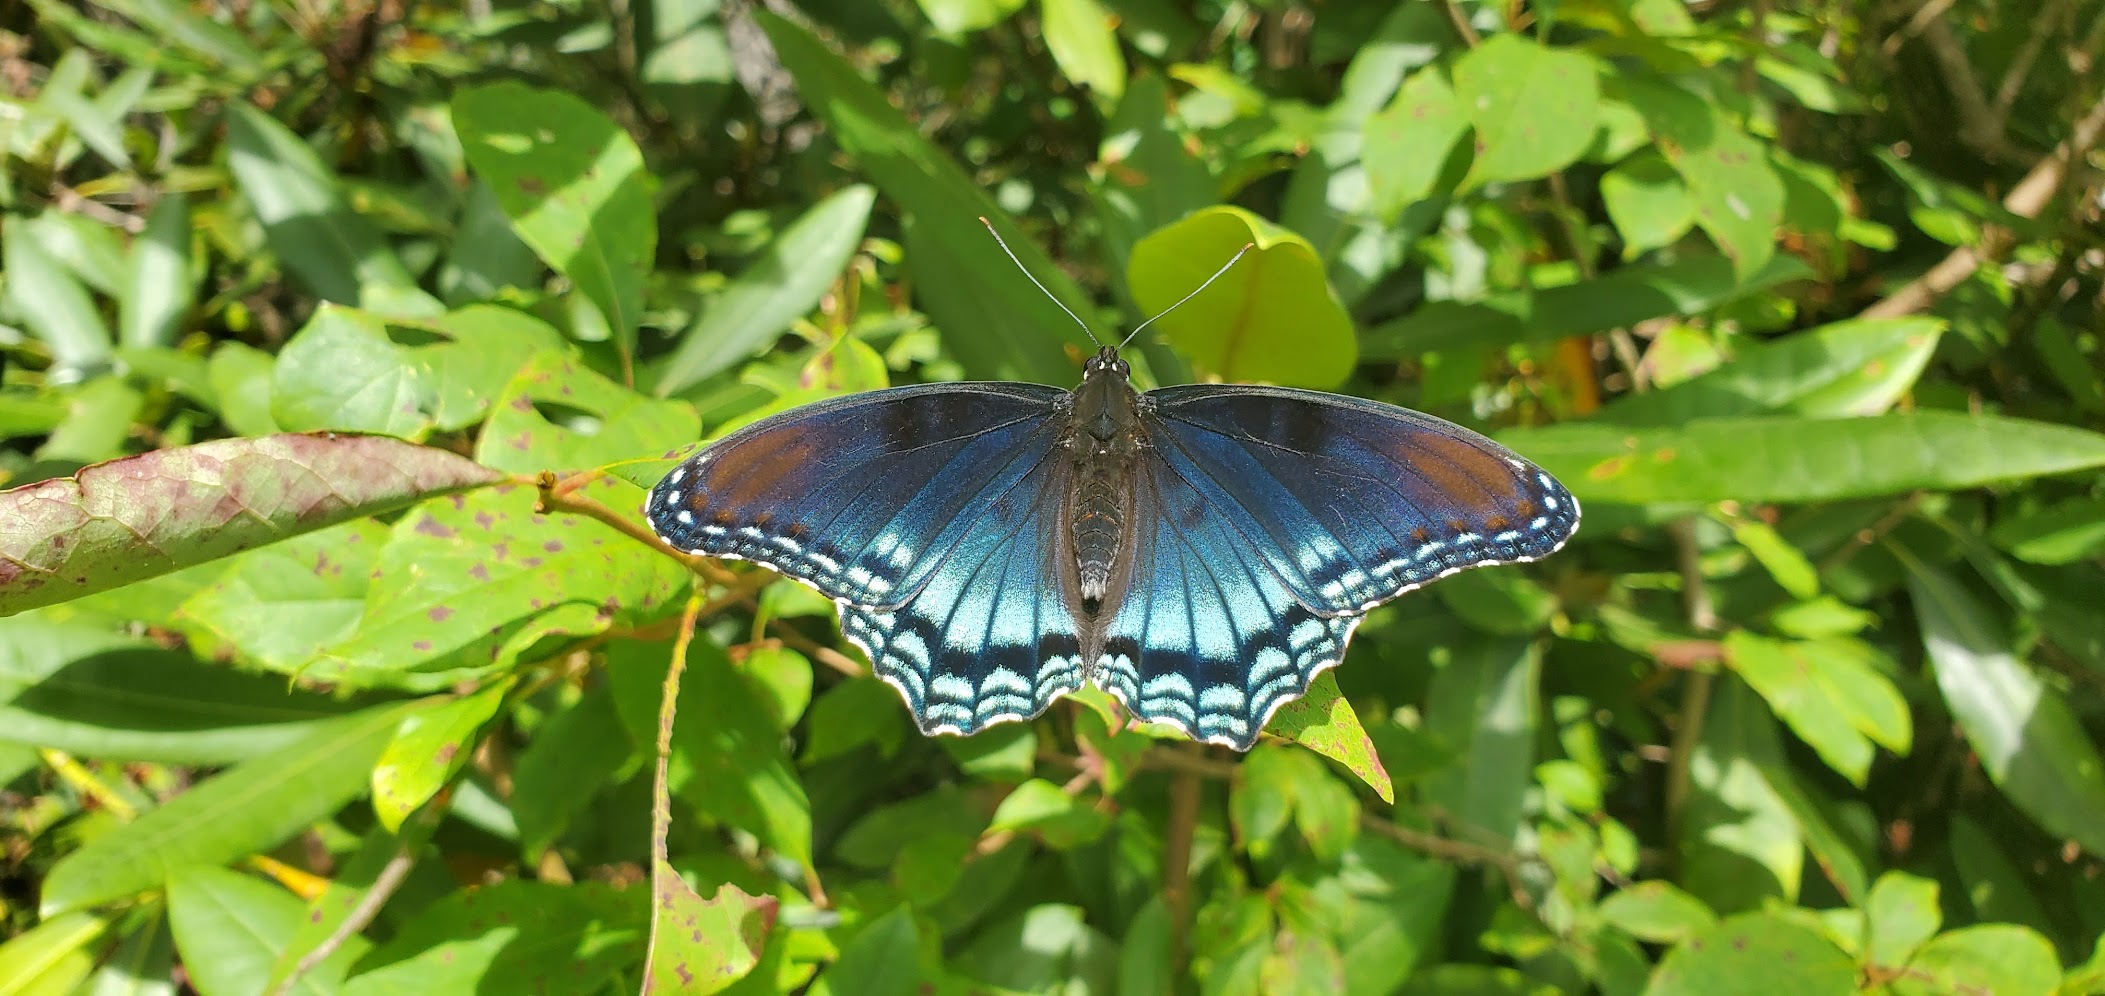 shiny blue butterfly resting on the leaves of a tree